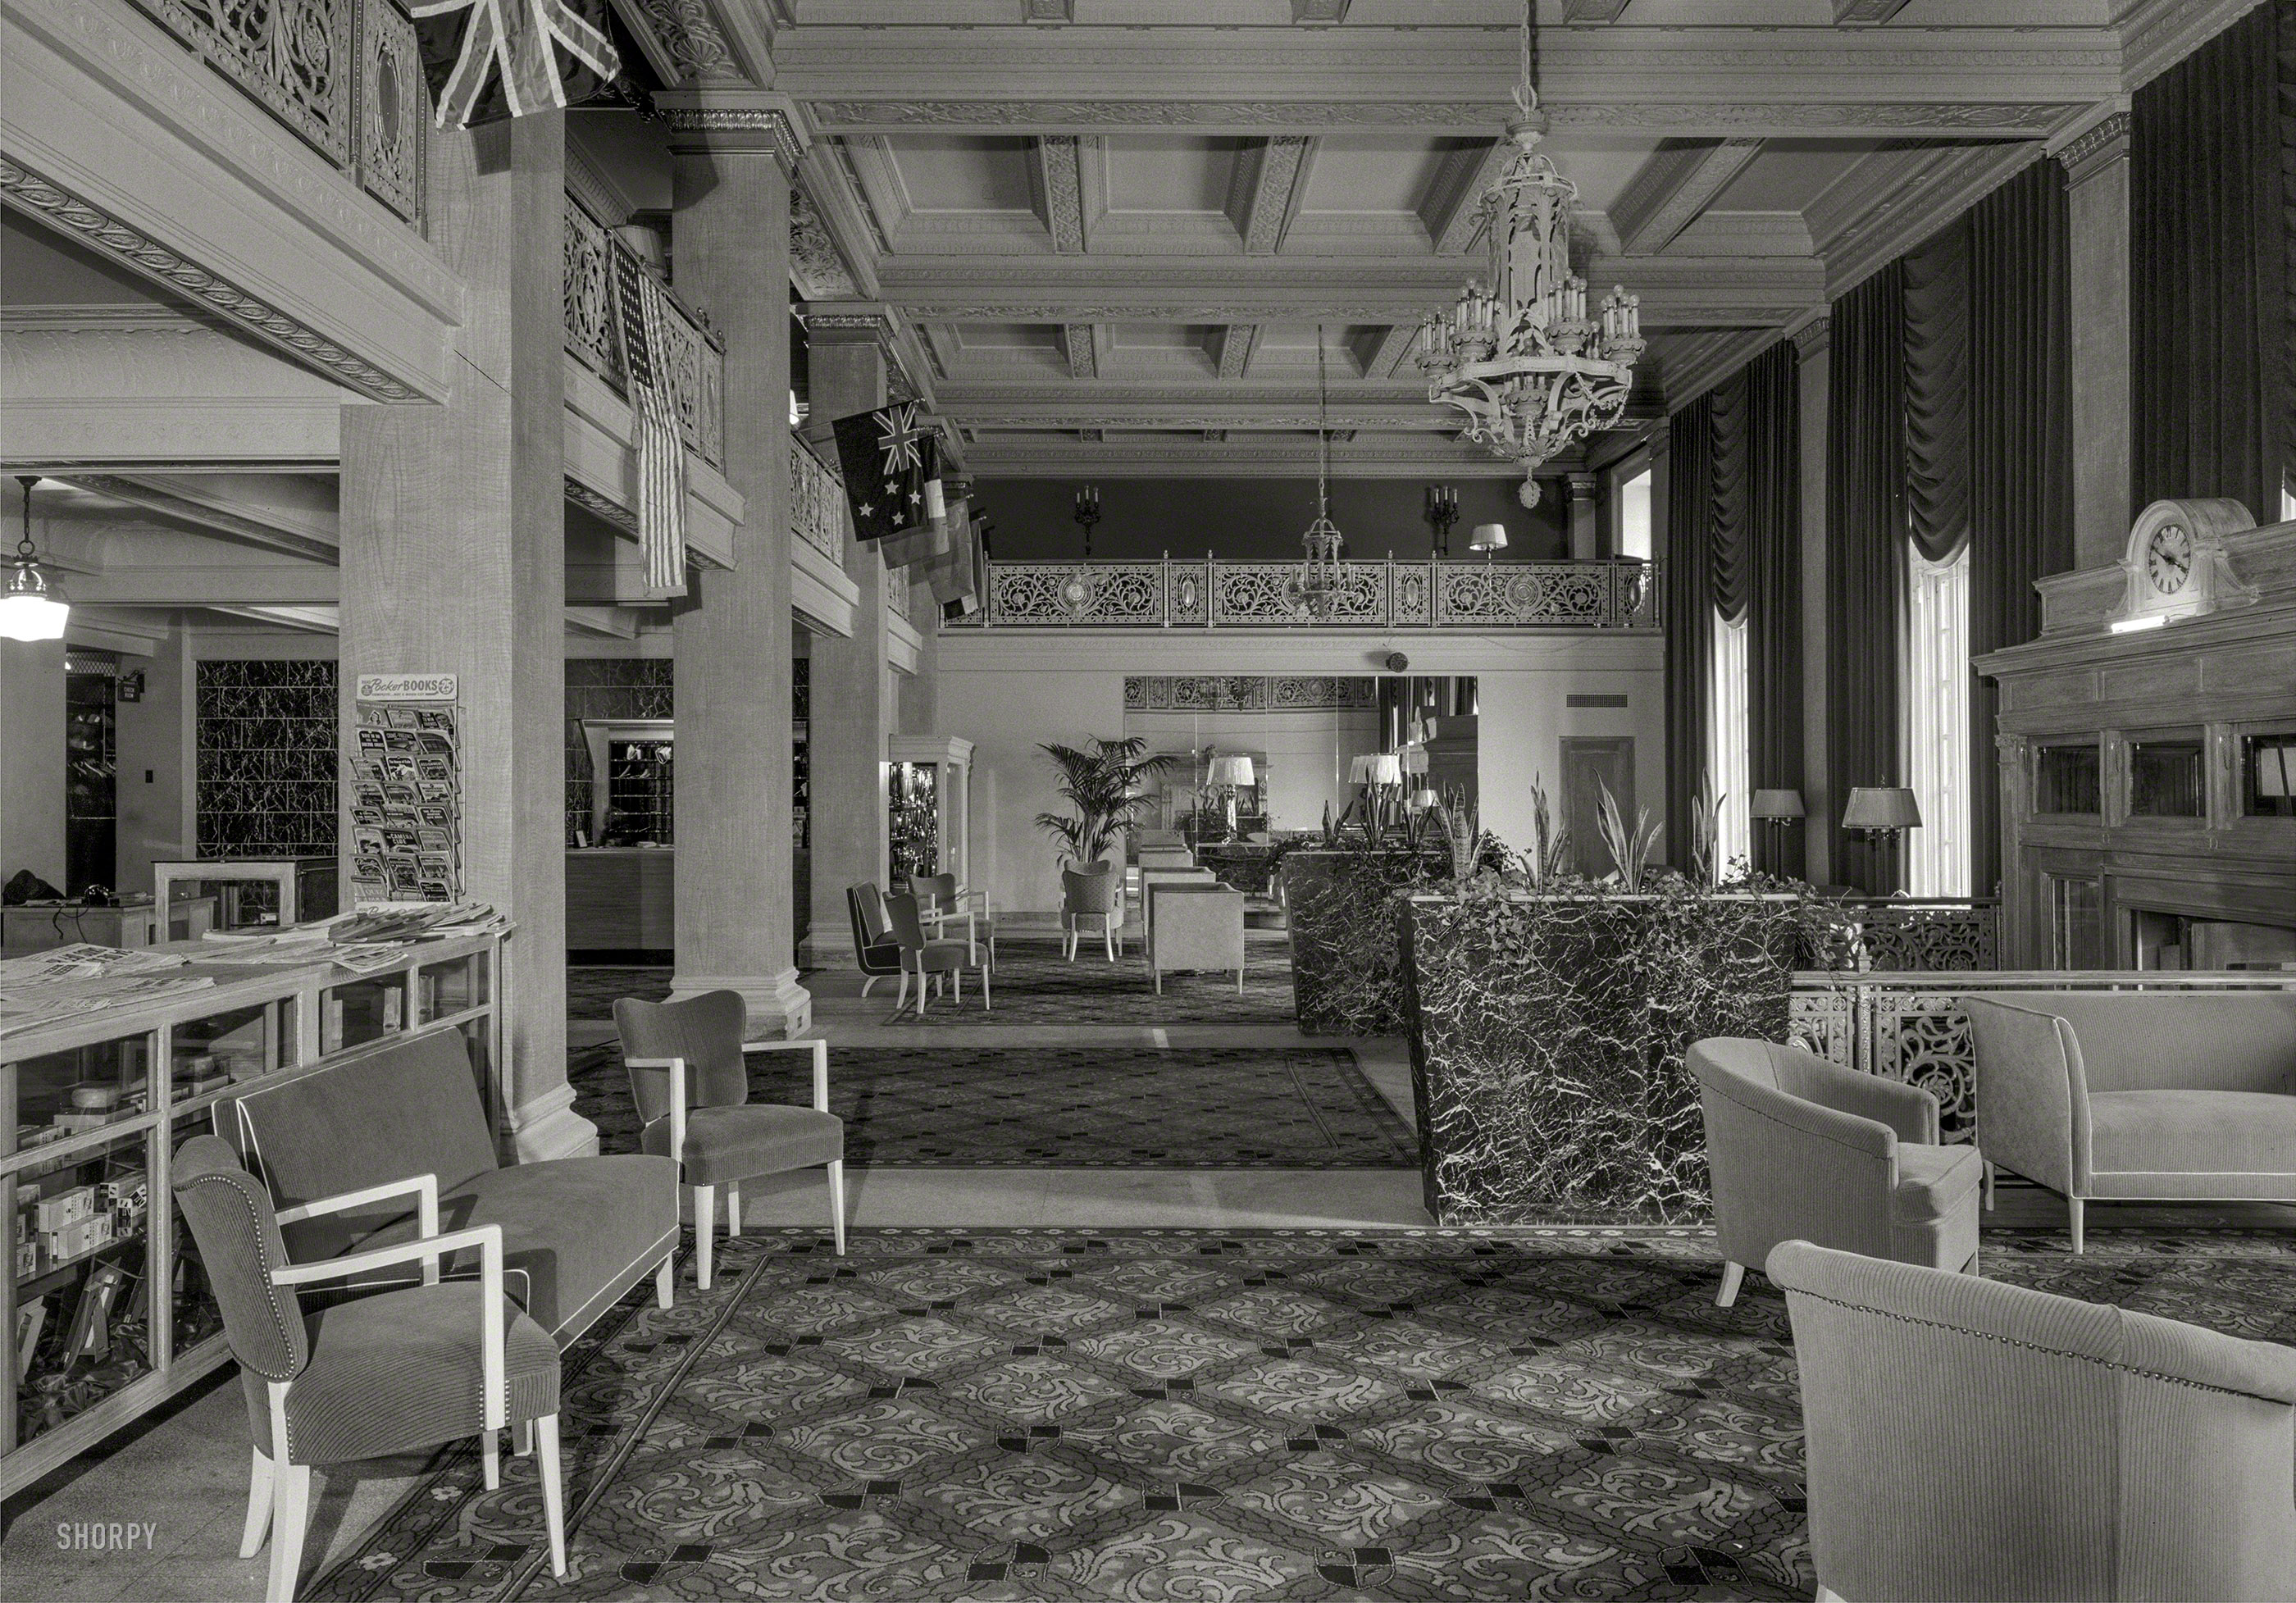 March 21, 1944. "Newark Athletic Club, Broad Street, Newark, New Jersey. Long shot of lobby. Morris Lapidus, architect." With a nice selection of 25-cent Pocket Books. Large-format acetate negative by Gottscho-Schleisner. View full size.